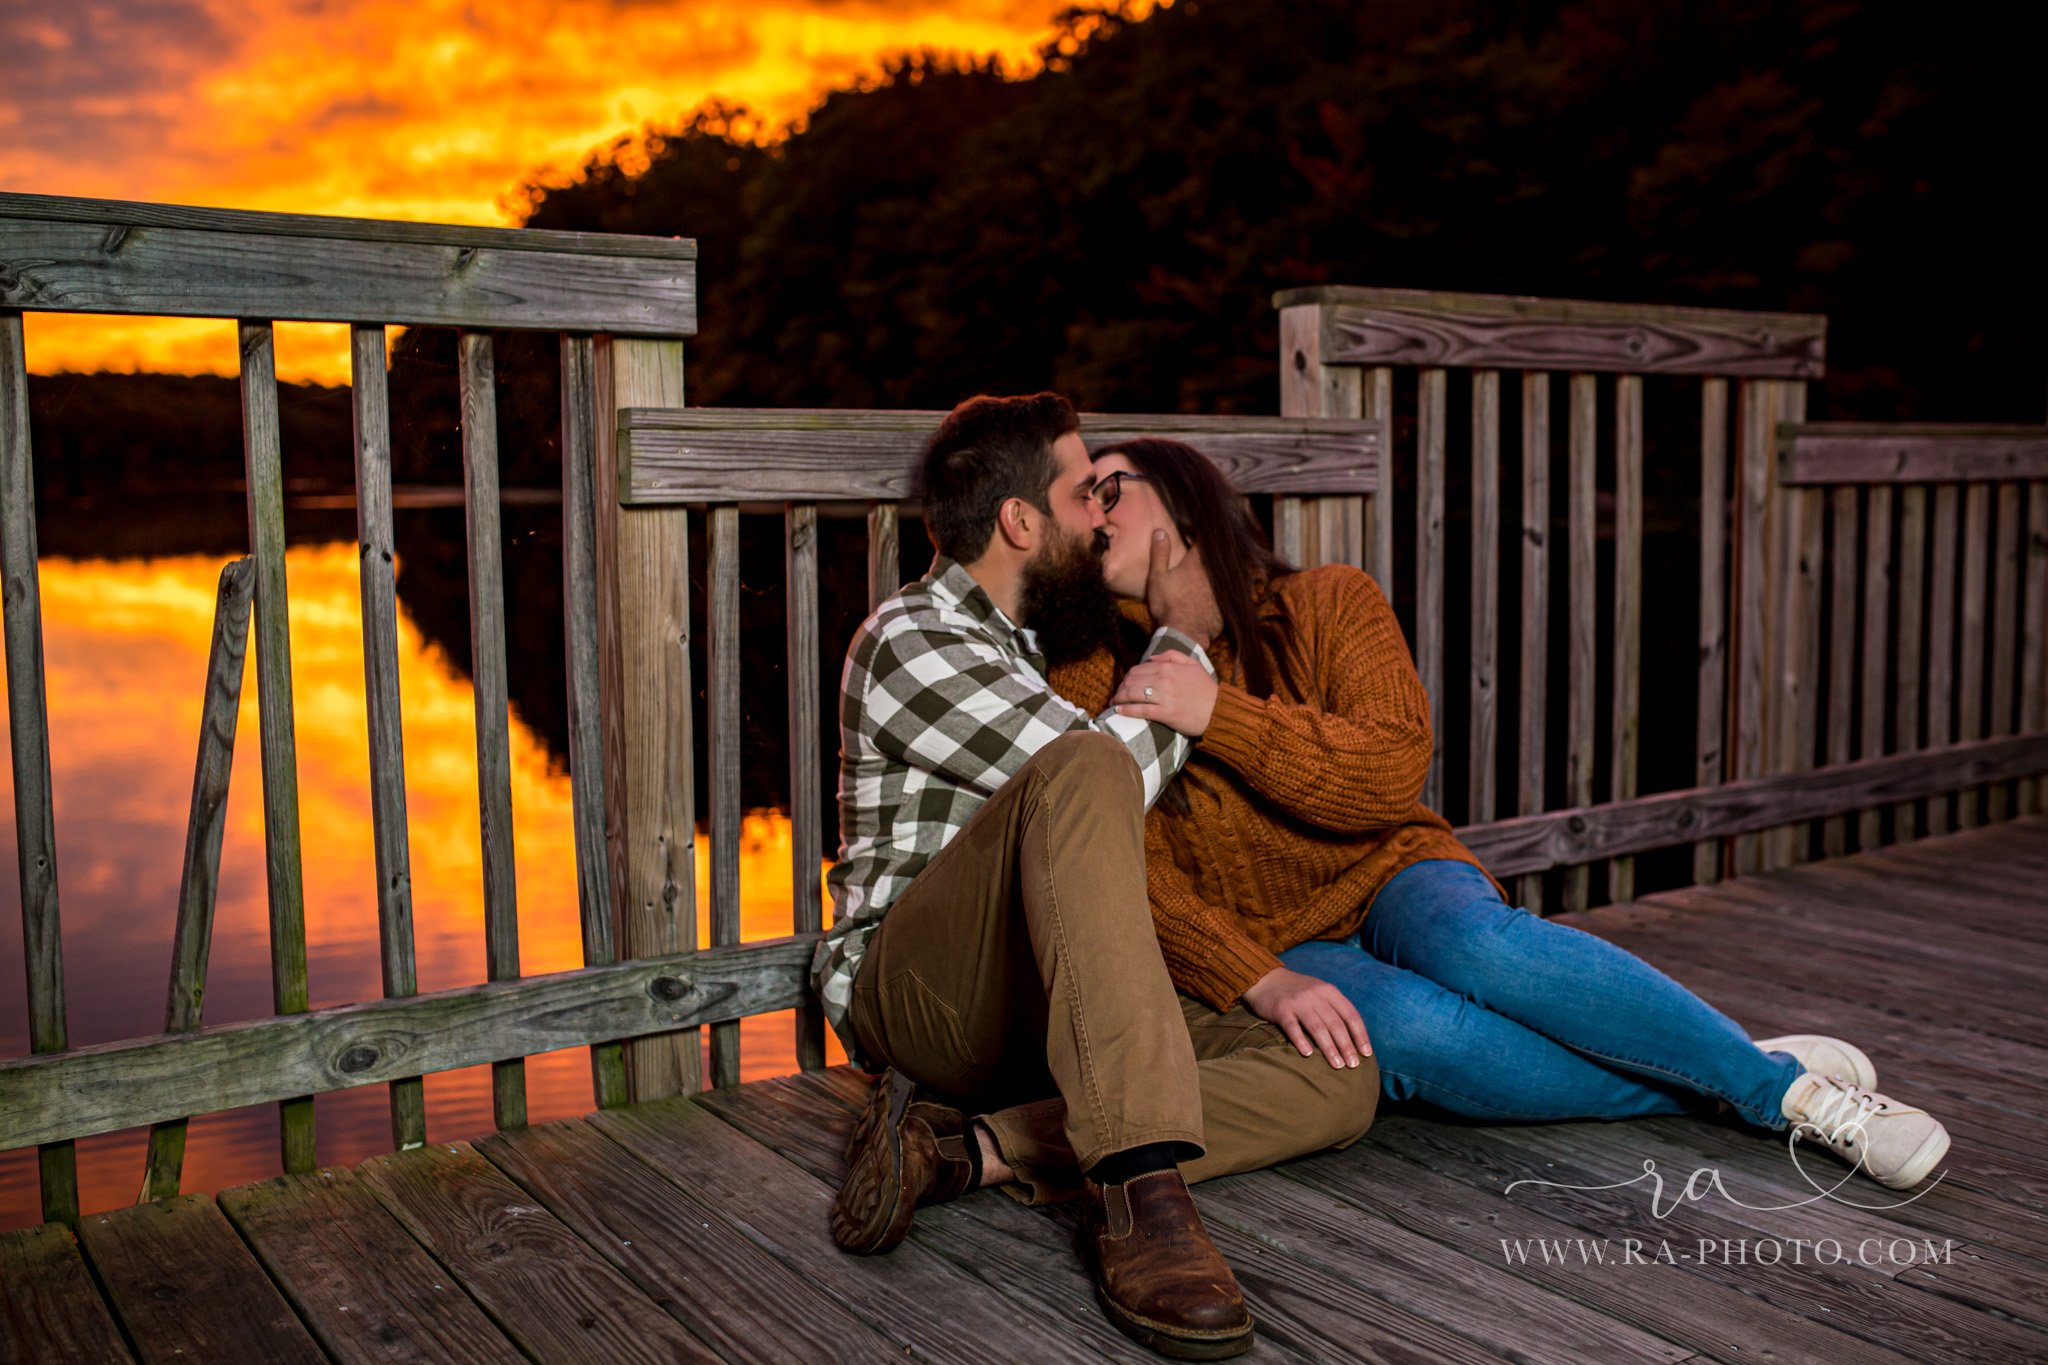 052-MGS-FALLS-CREEK-PA-ENGAGEMENT-PICTURES.jpg